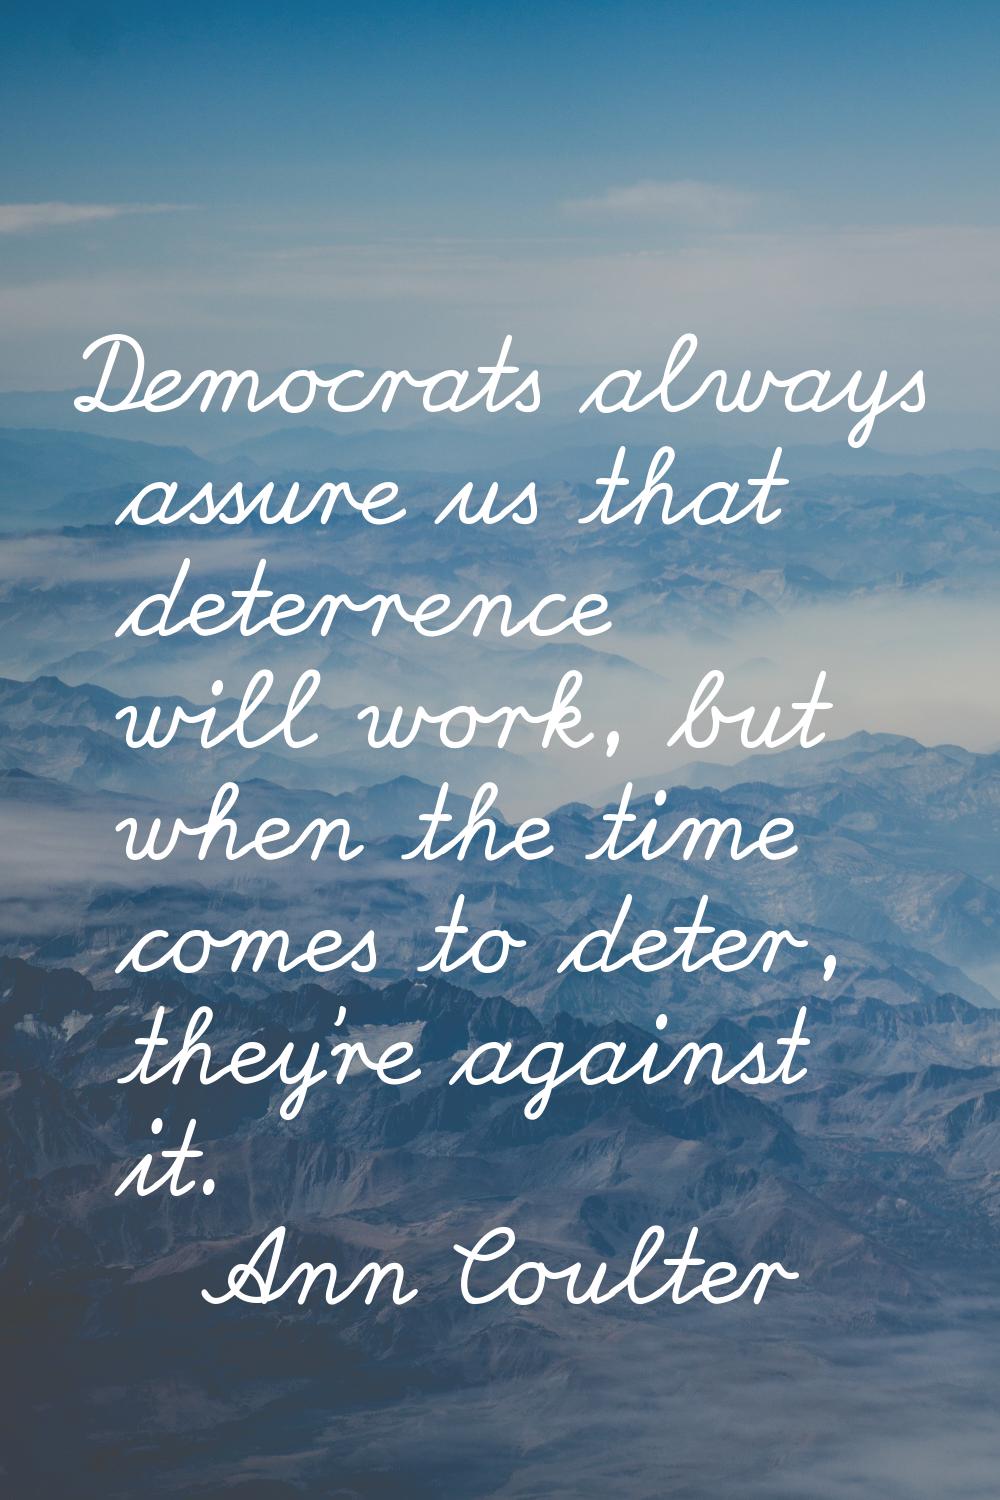 Democrats always assure us that deterrence will work, but when the time comes to deter, they're aga